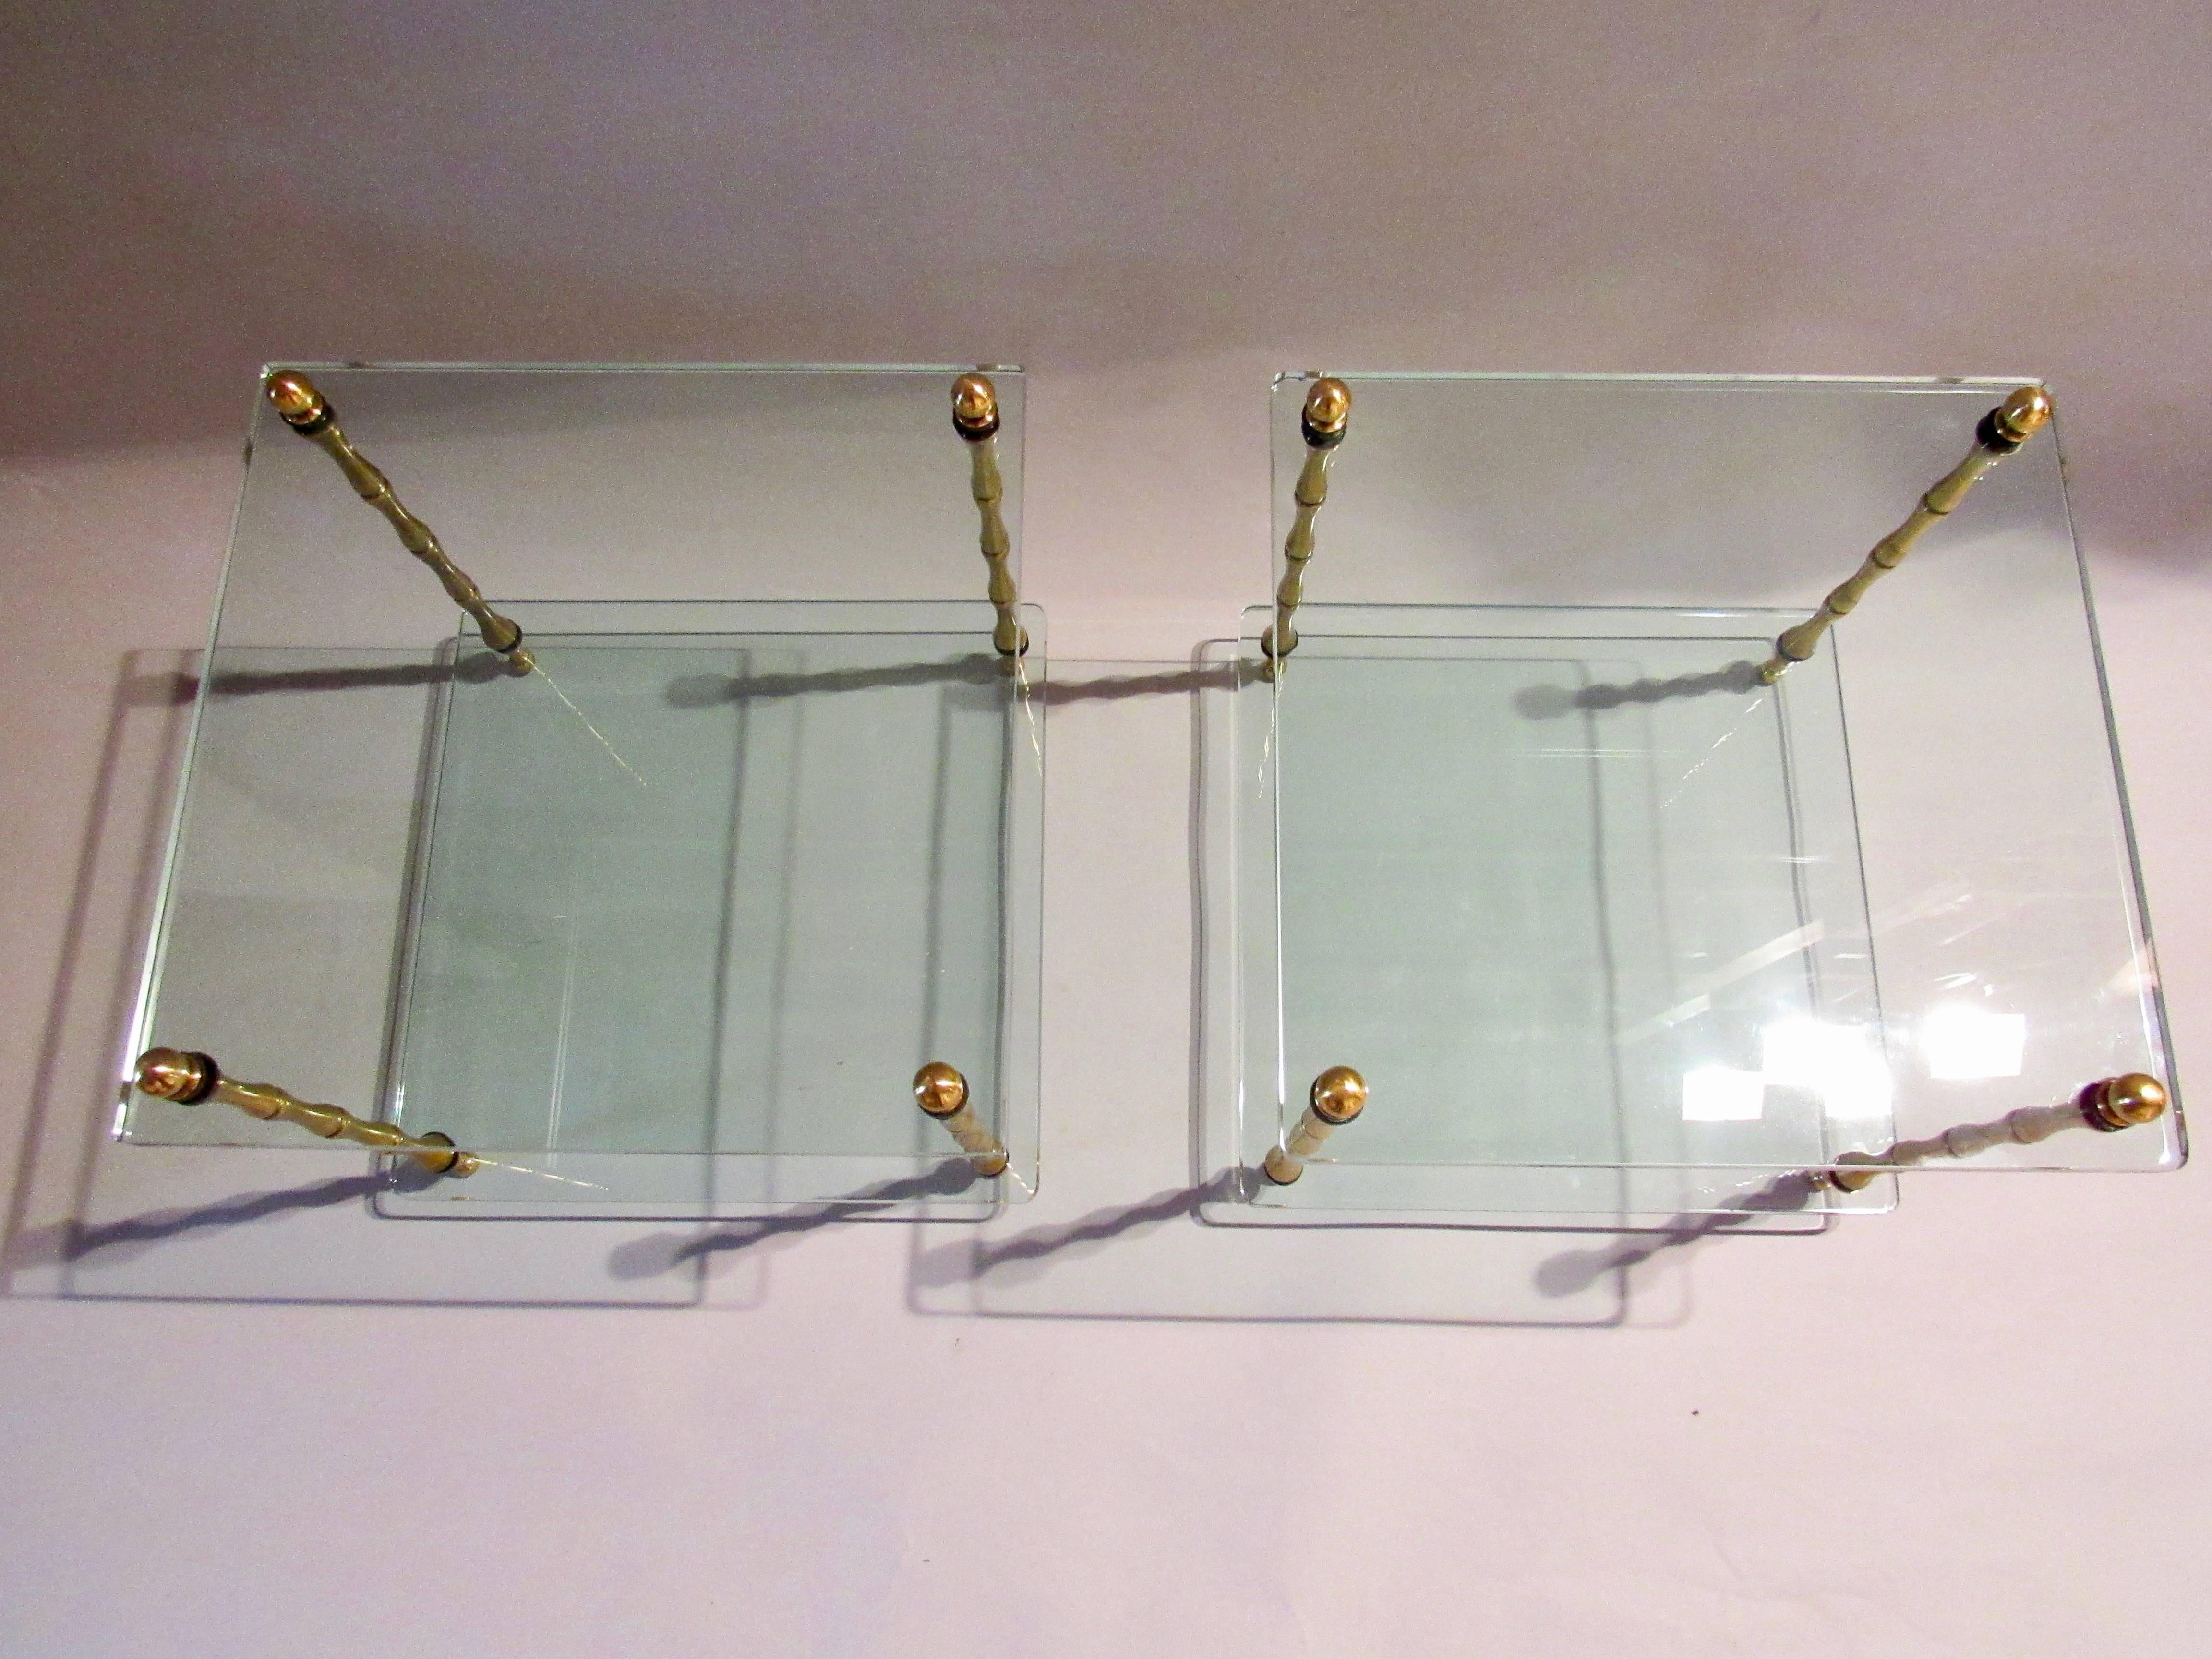 Polished Baker Furniture Company Brass Tables Mid Century Two-Tiered Glass Shelves 1960s For Sale